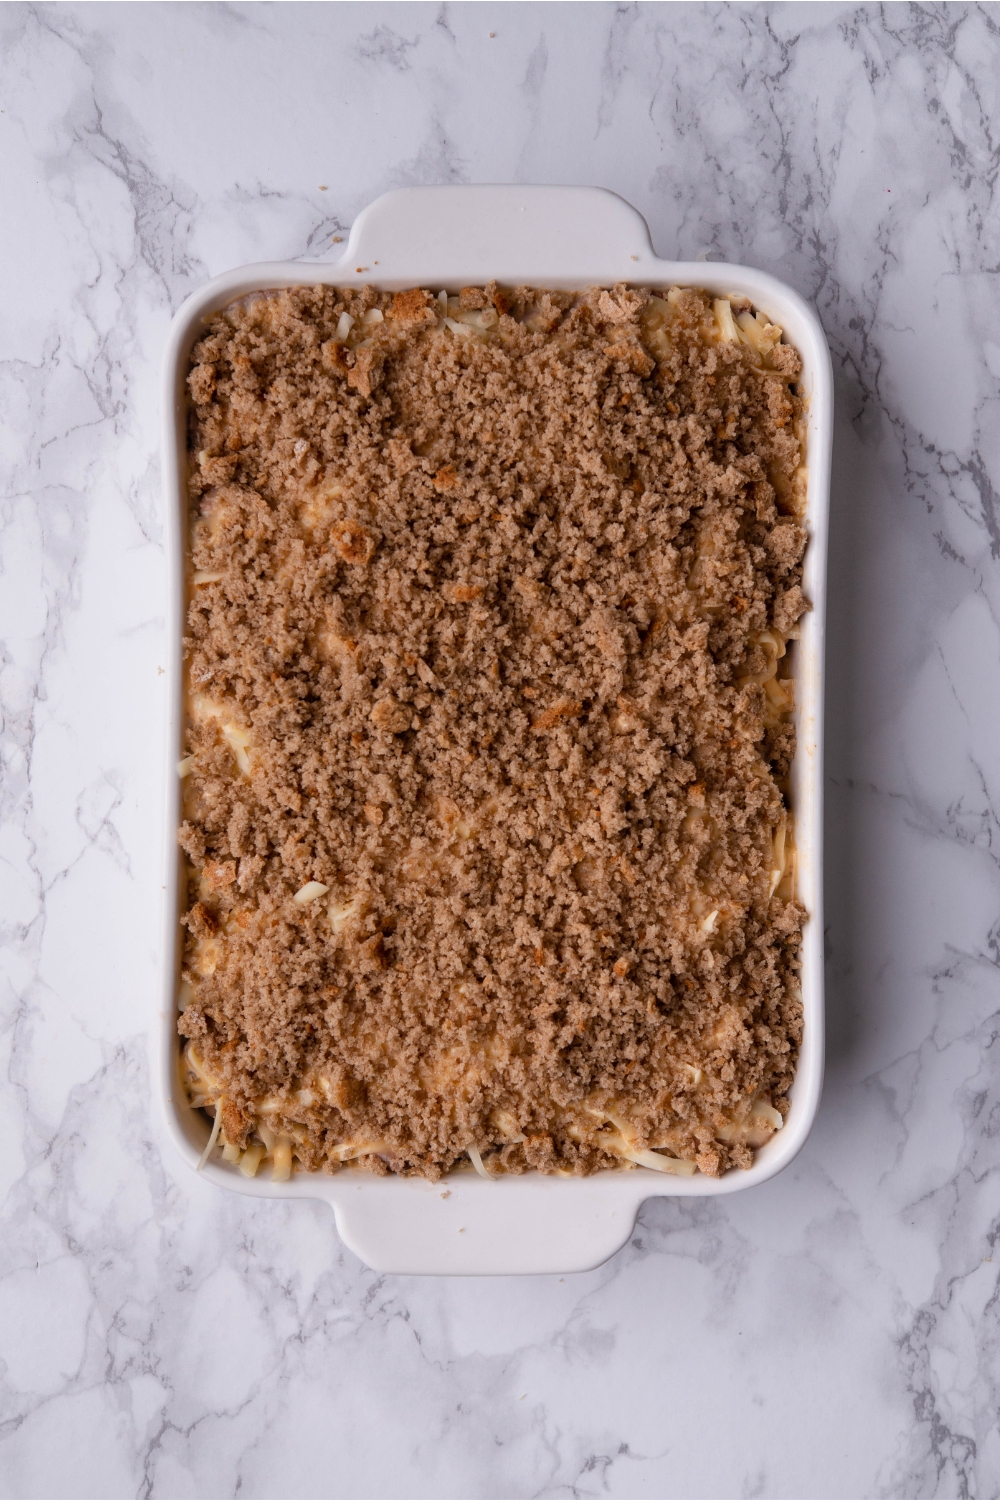 Unbaked Reuben casserole covered in bread crumbs in a white baking dish.